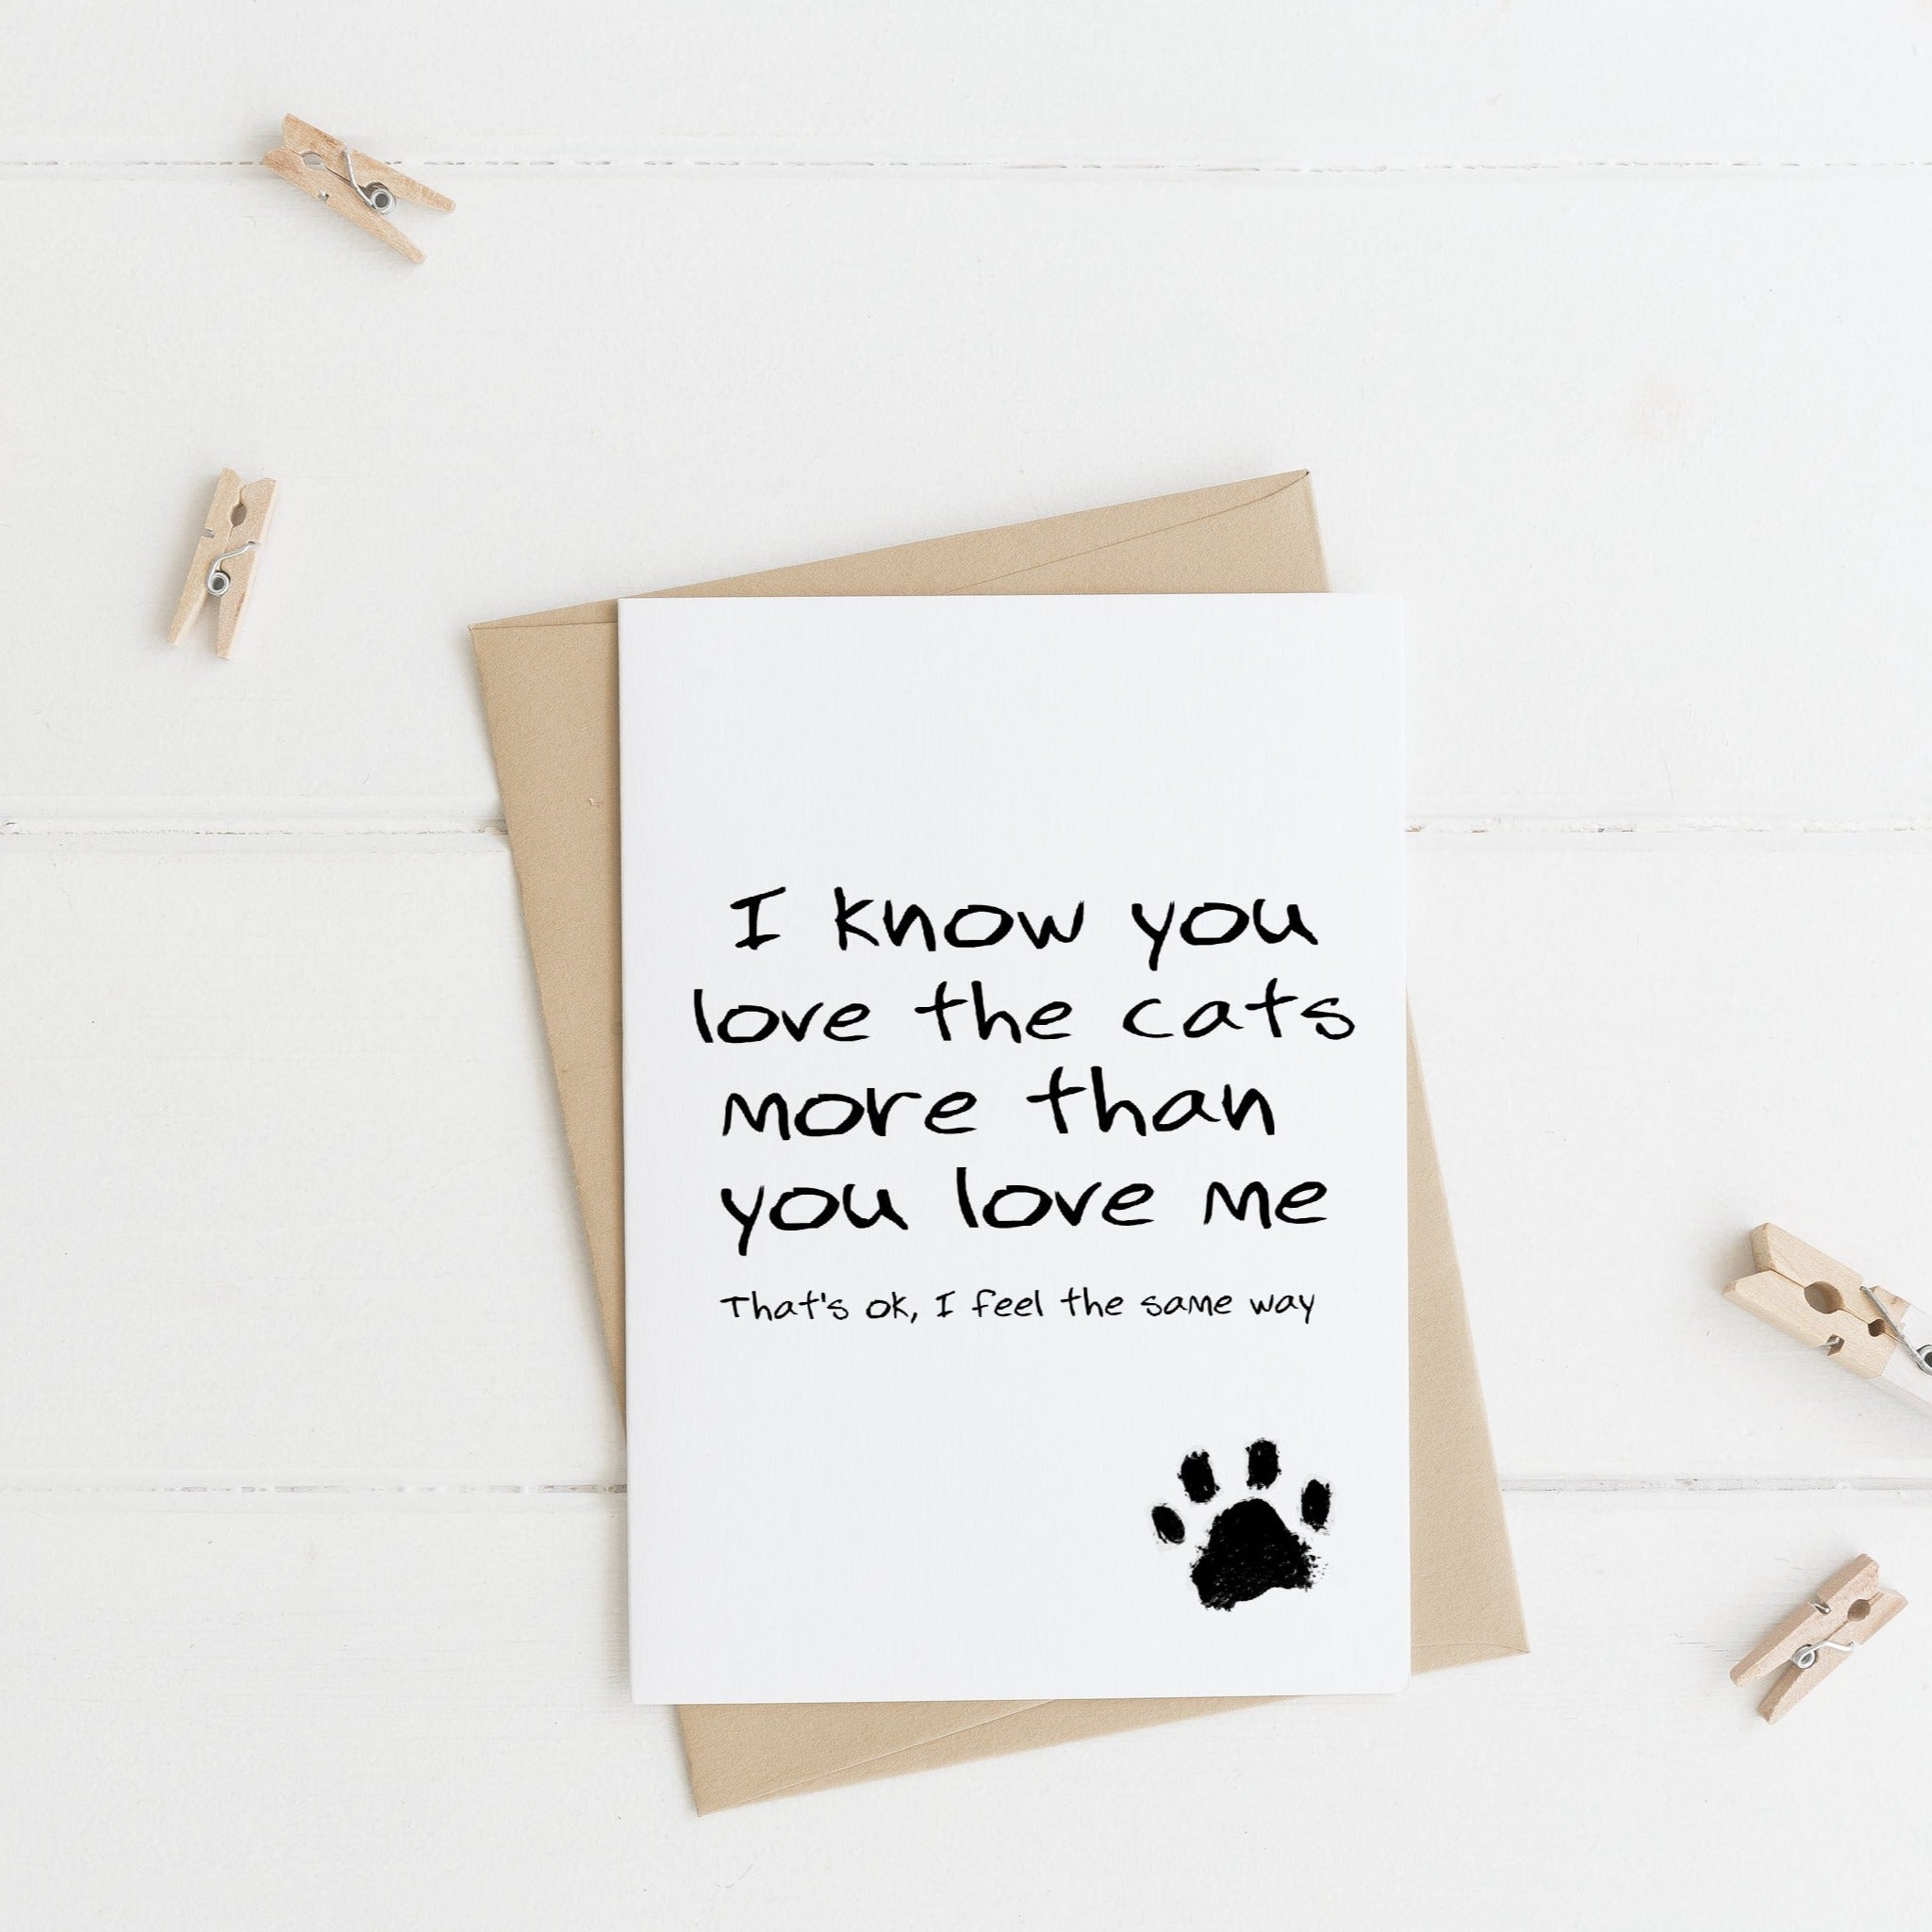 i know you love the cats more than you love me, thats ok, i feel the same way. valentines day animal greeting card